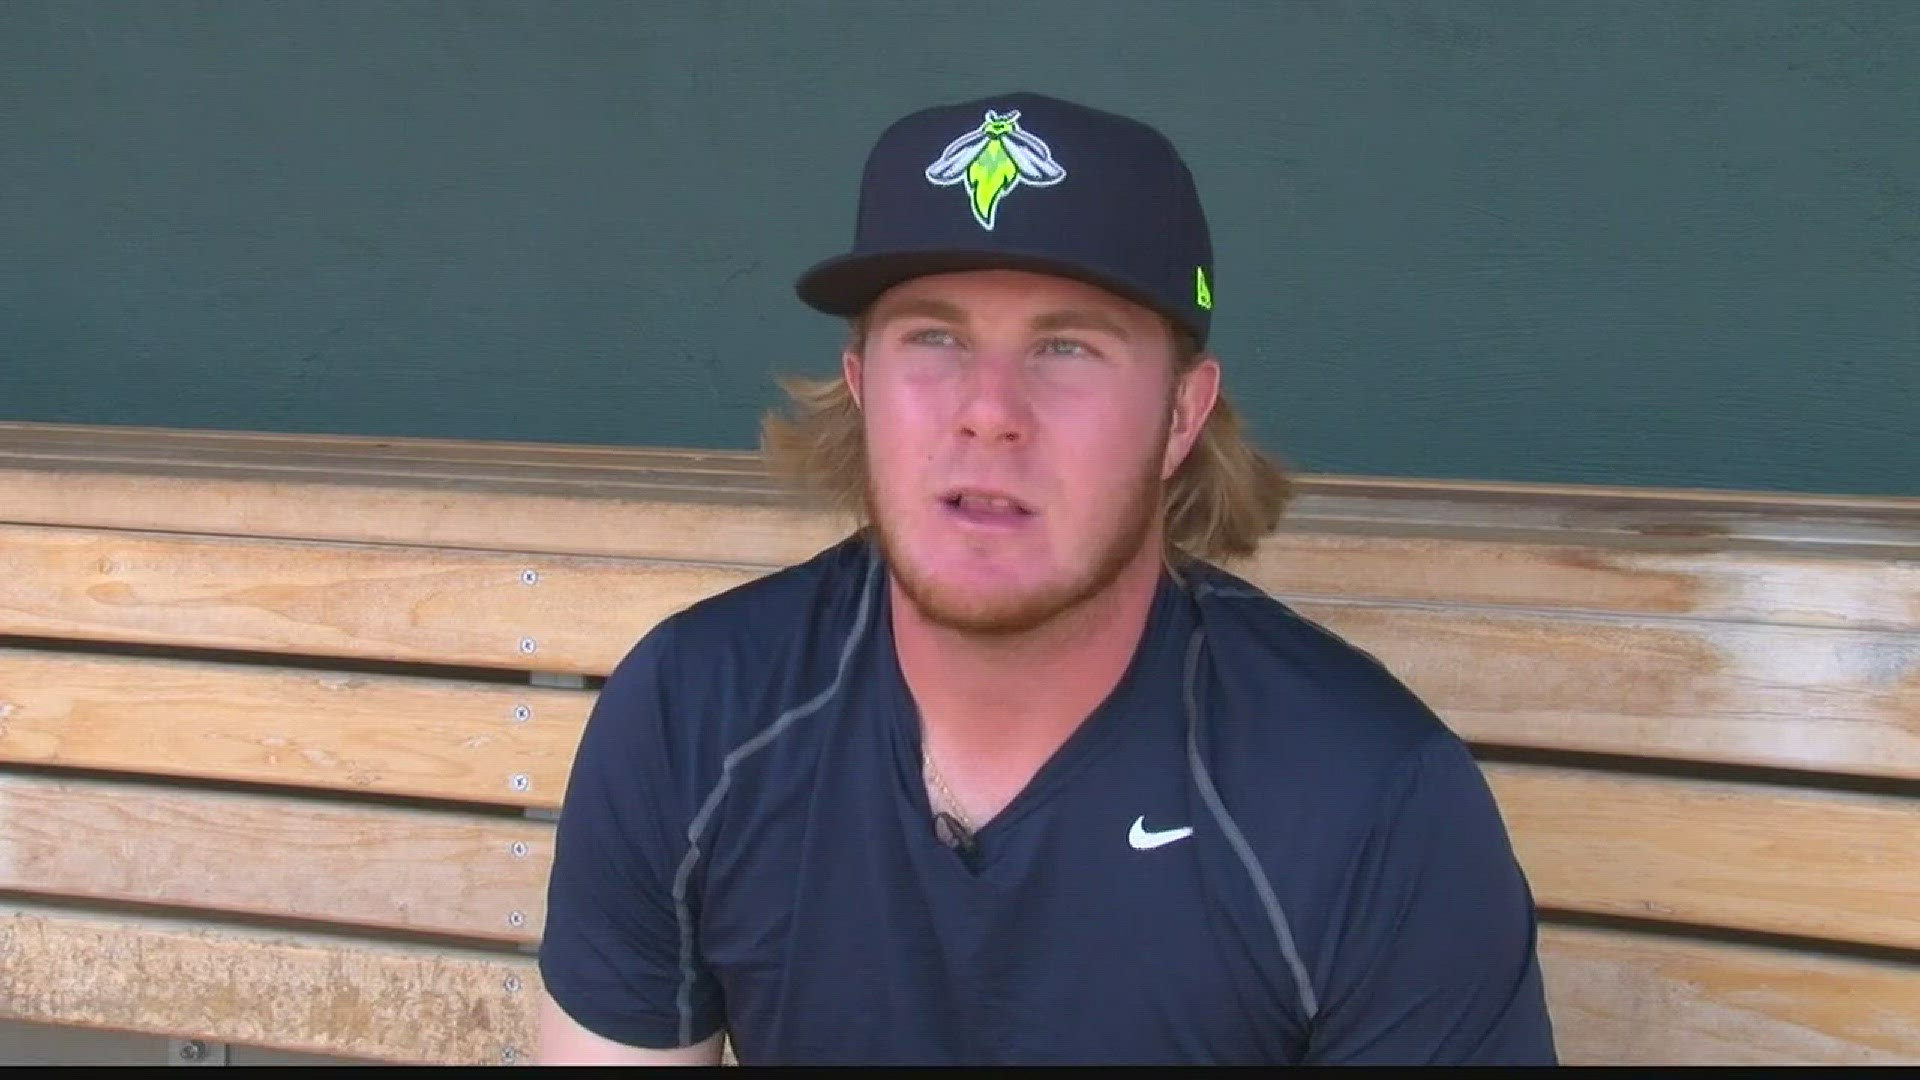 News19's Joe Cook introduces you to Fireflies' star Dash Winningham and how the slugger got his first name.